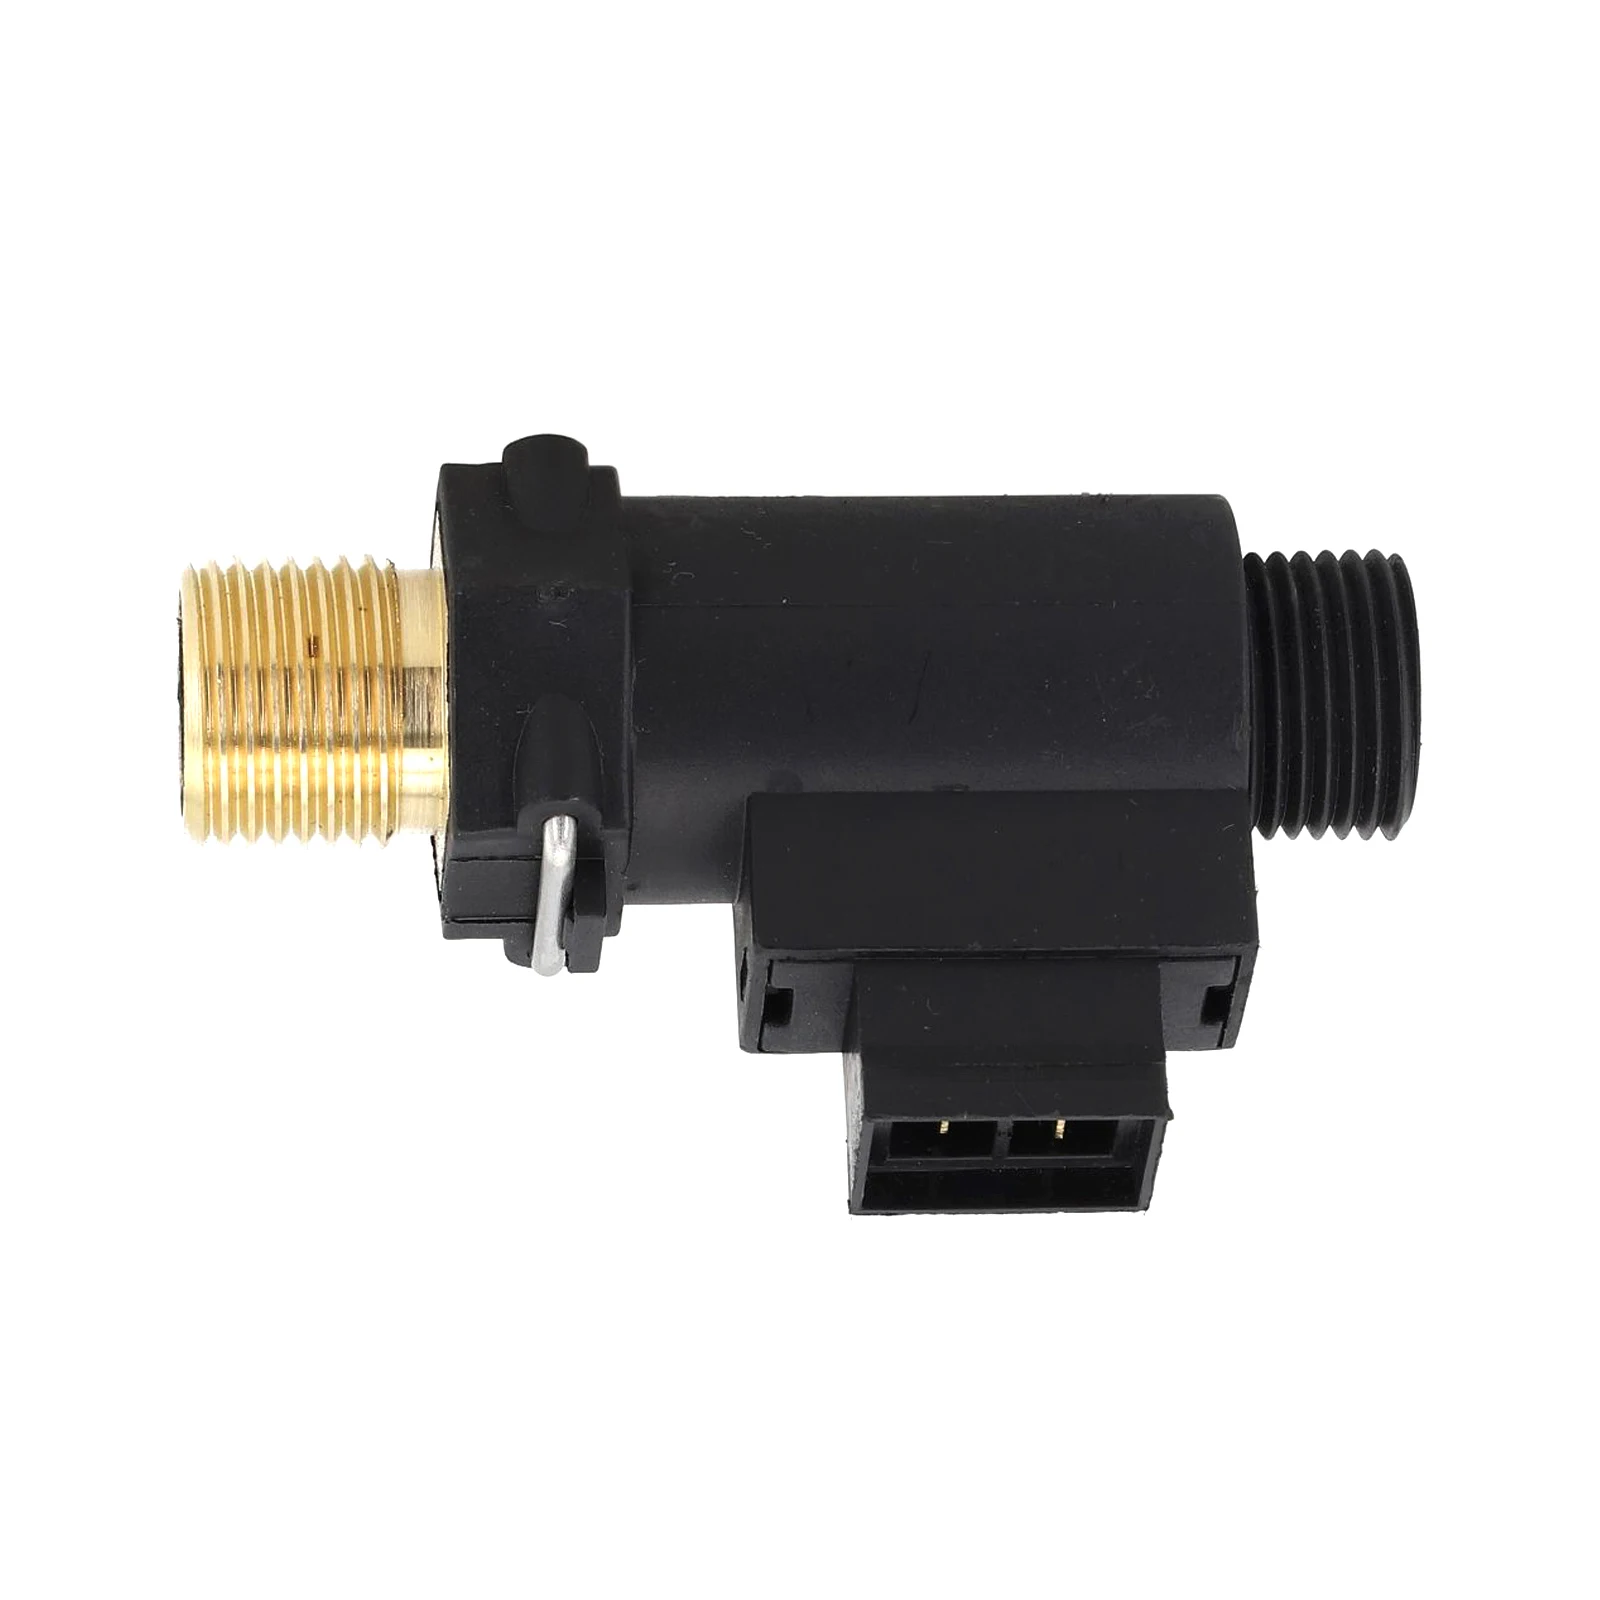 

1pc Boiler Parts Water Flow Sensor Switch For Ariston For Baxi Main Four And Beretta Brass Black Sensor Switch 125-250V